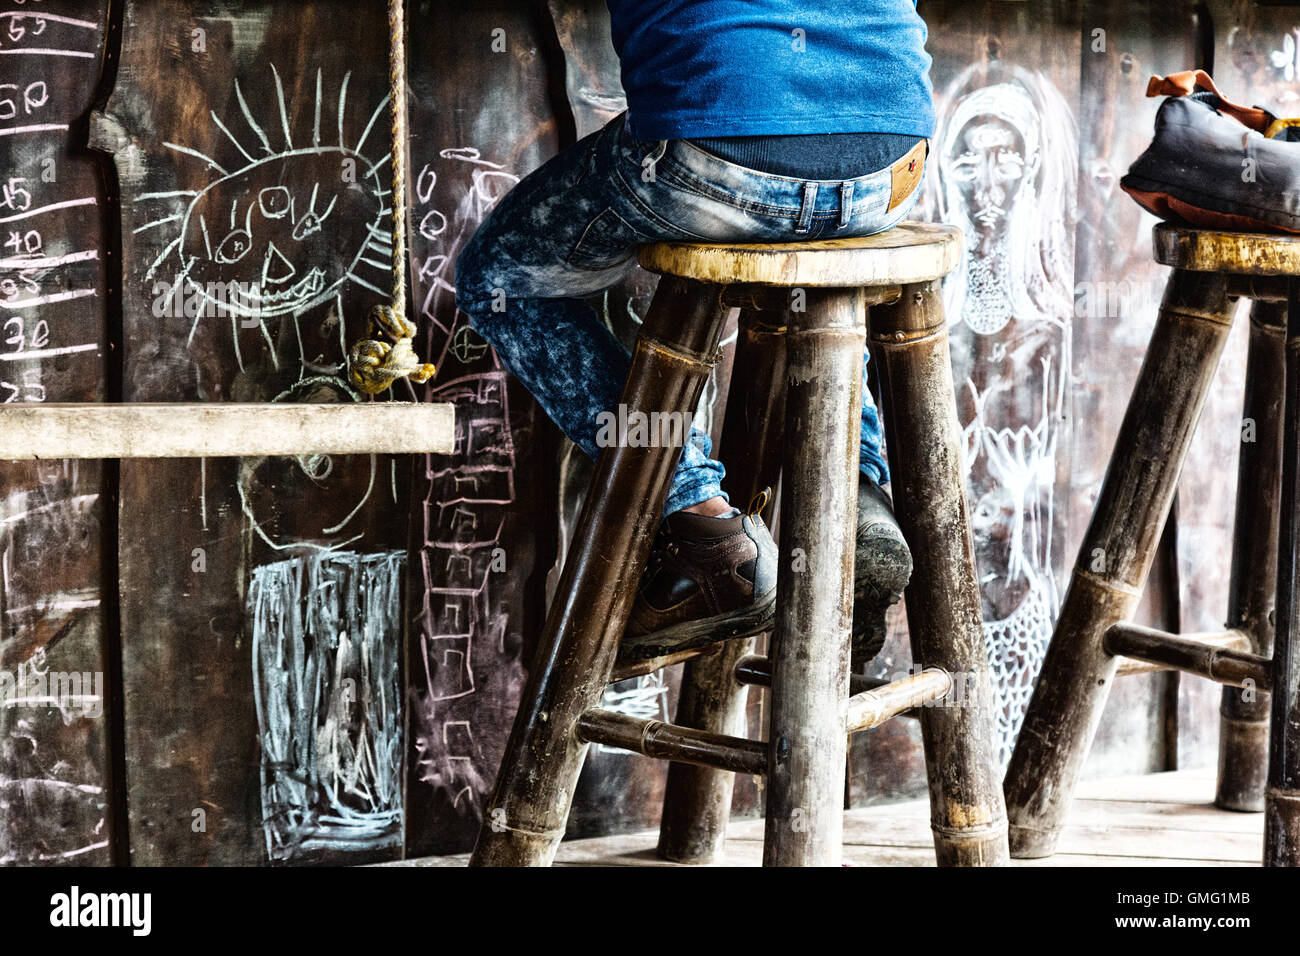 Man sitting at a bar on a barstool, Dominical village, Costa Rica, Central America Stock Photo